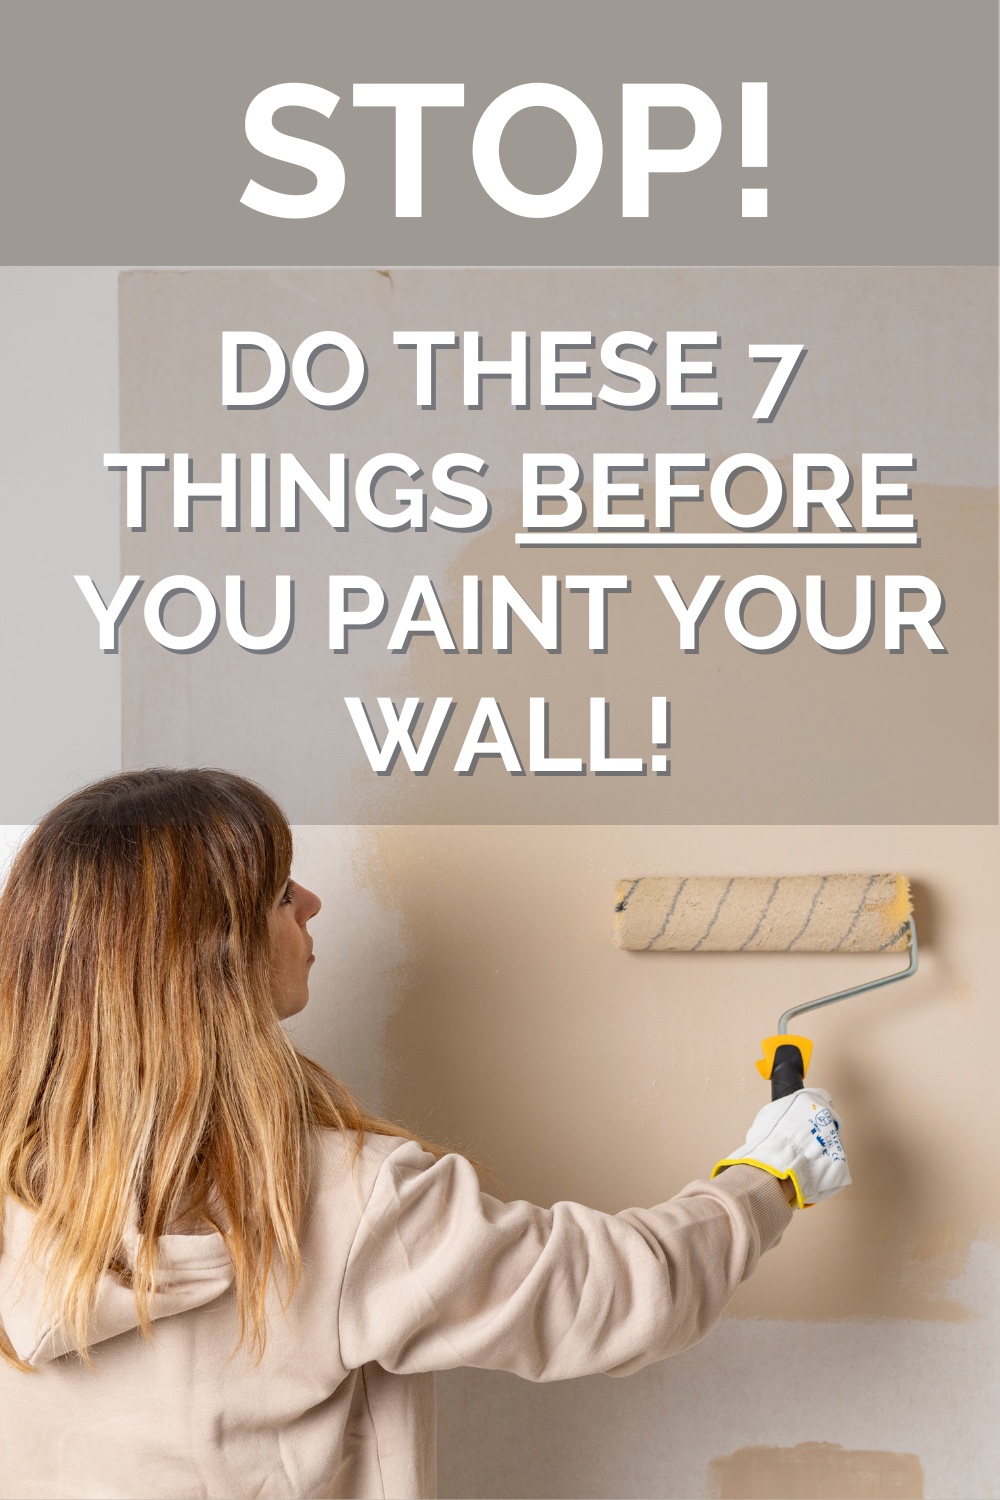 Top 10 Ways to Paint Like a Pro